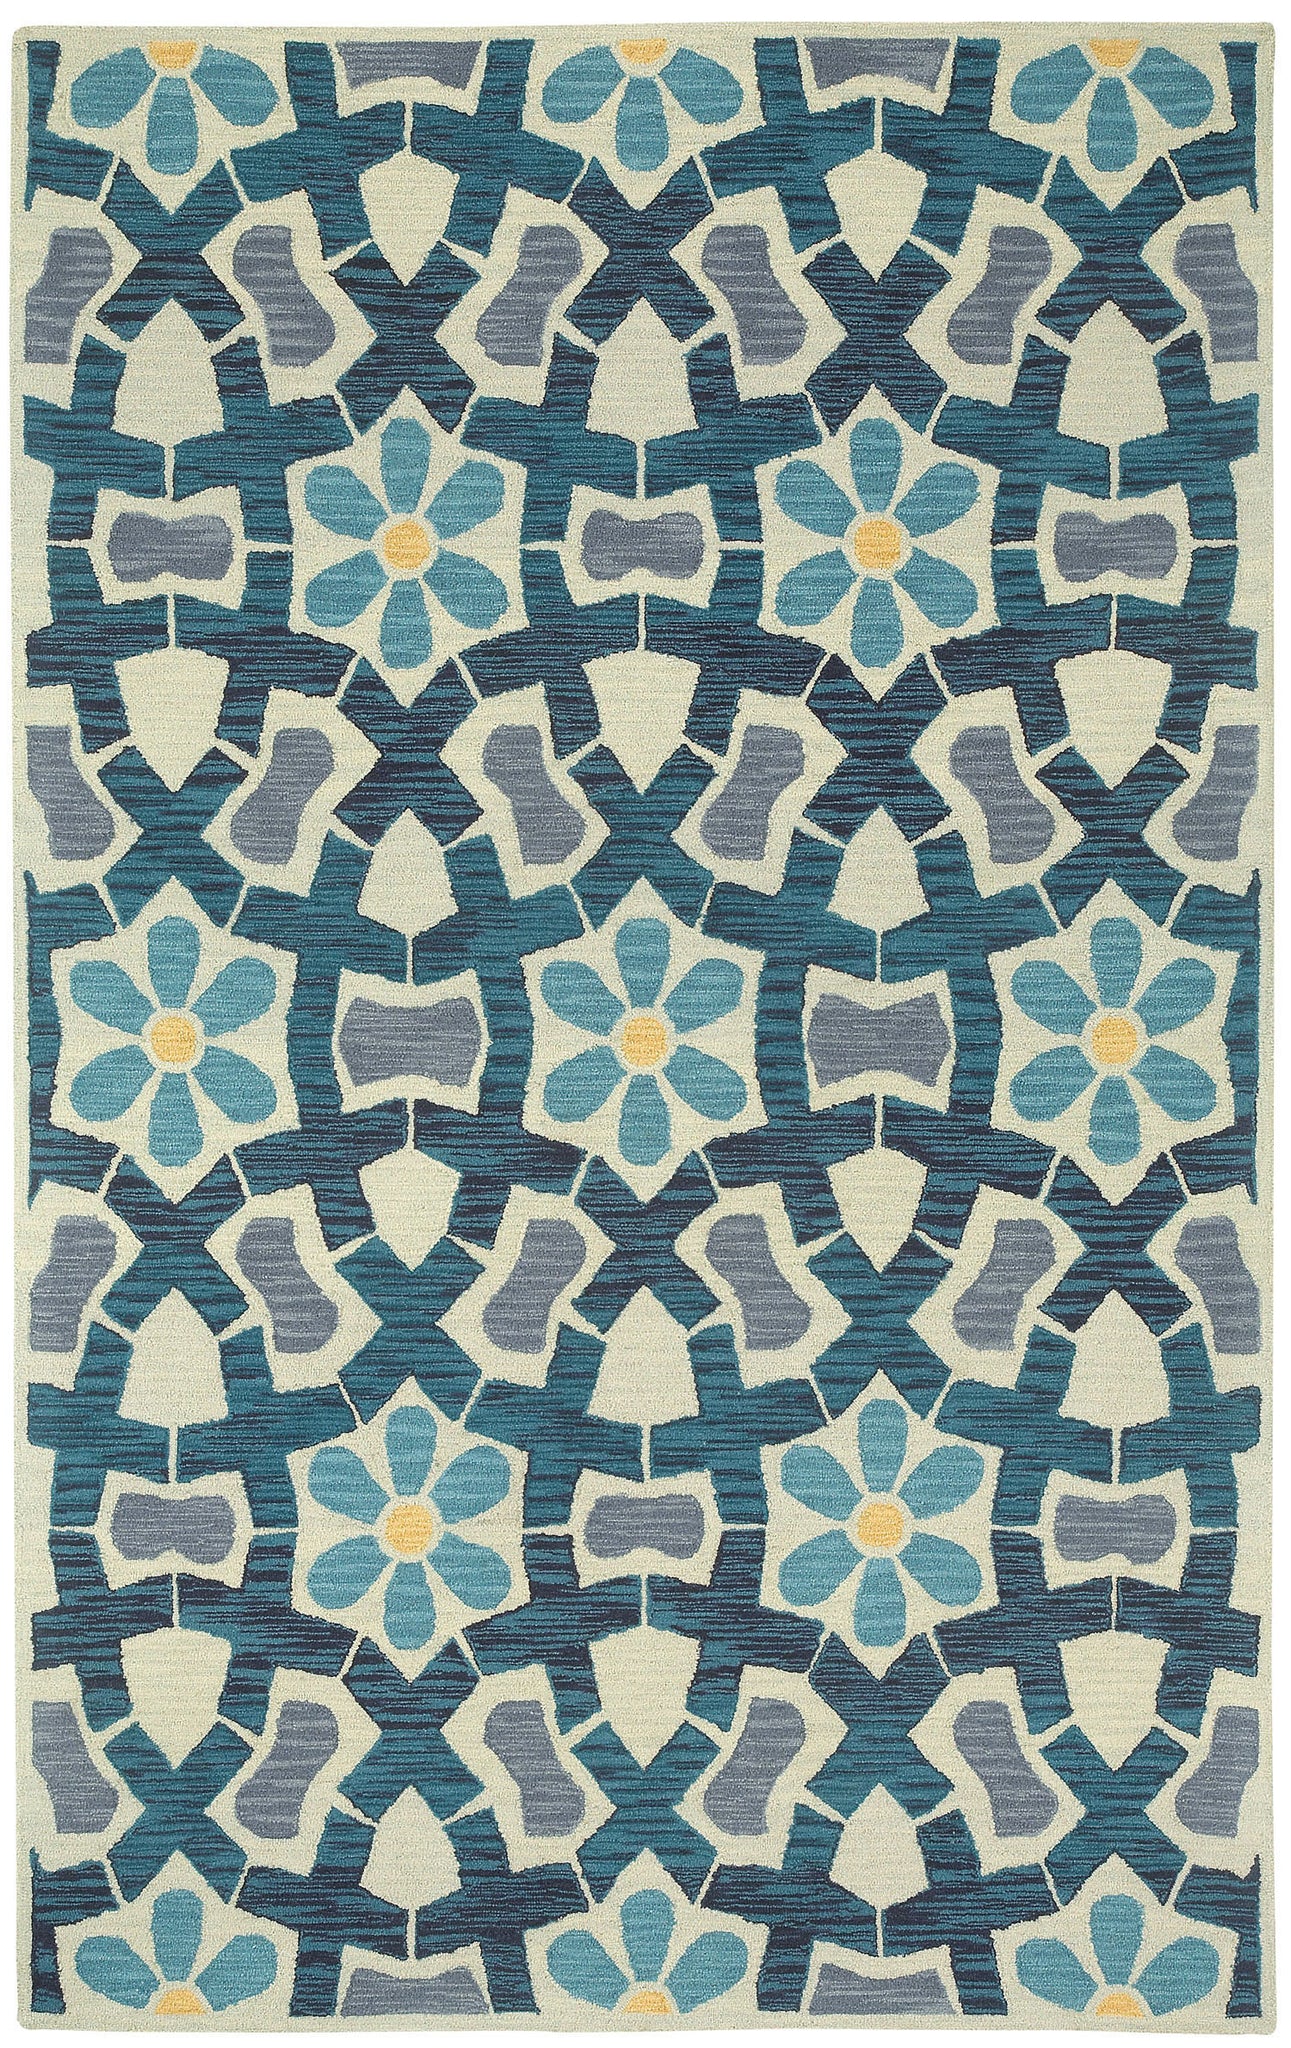 Capel Stepping Stone 3293 Sand Blue 740 Area Rug main image